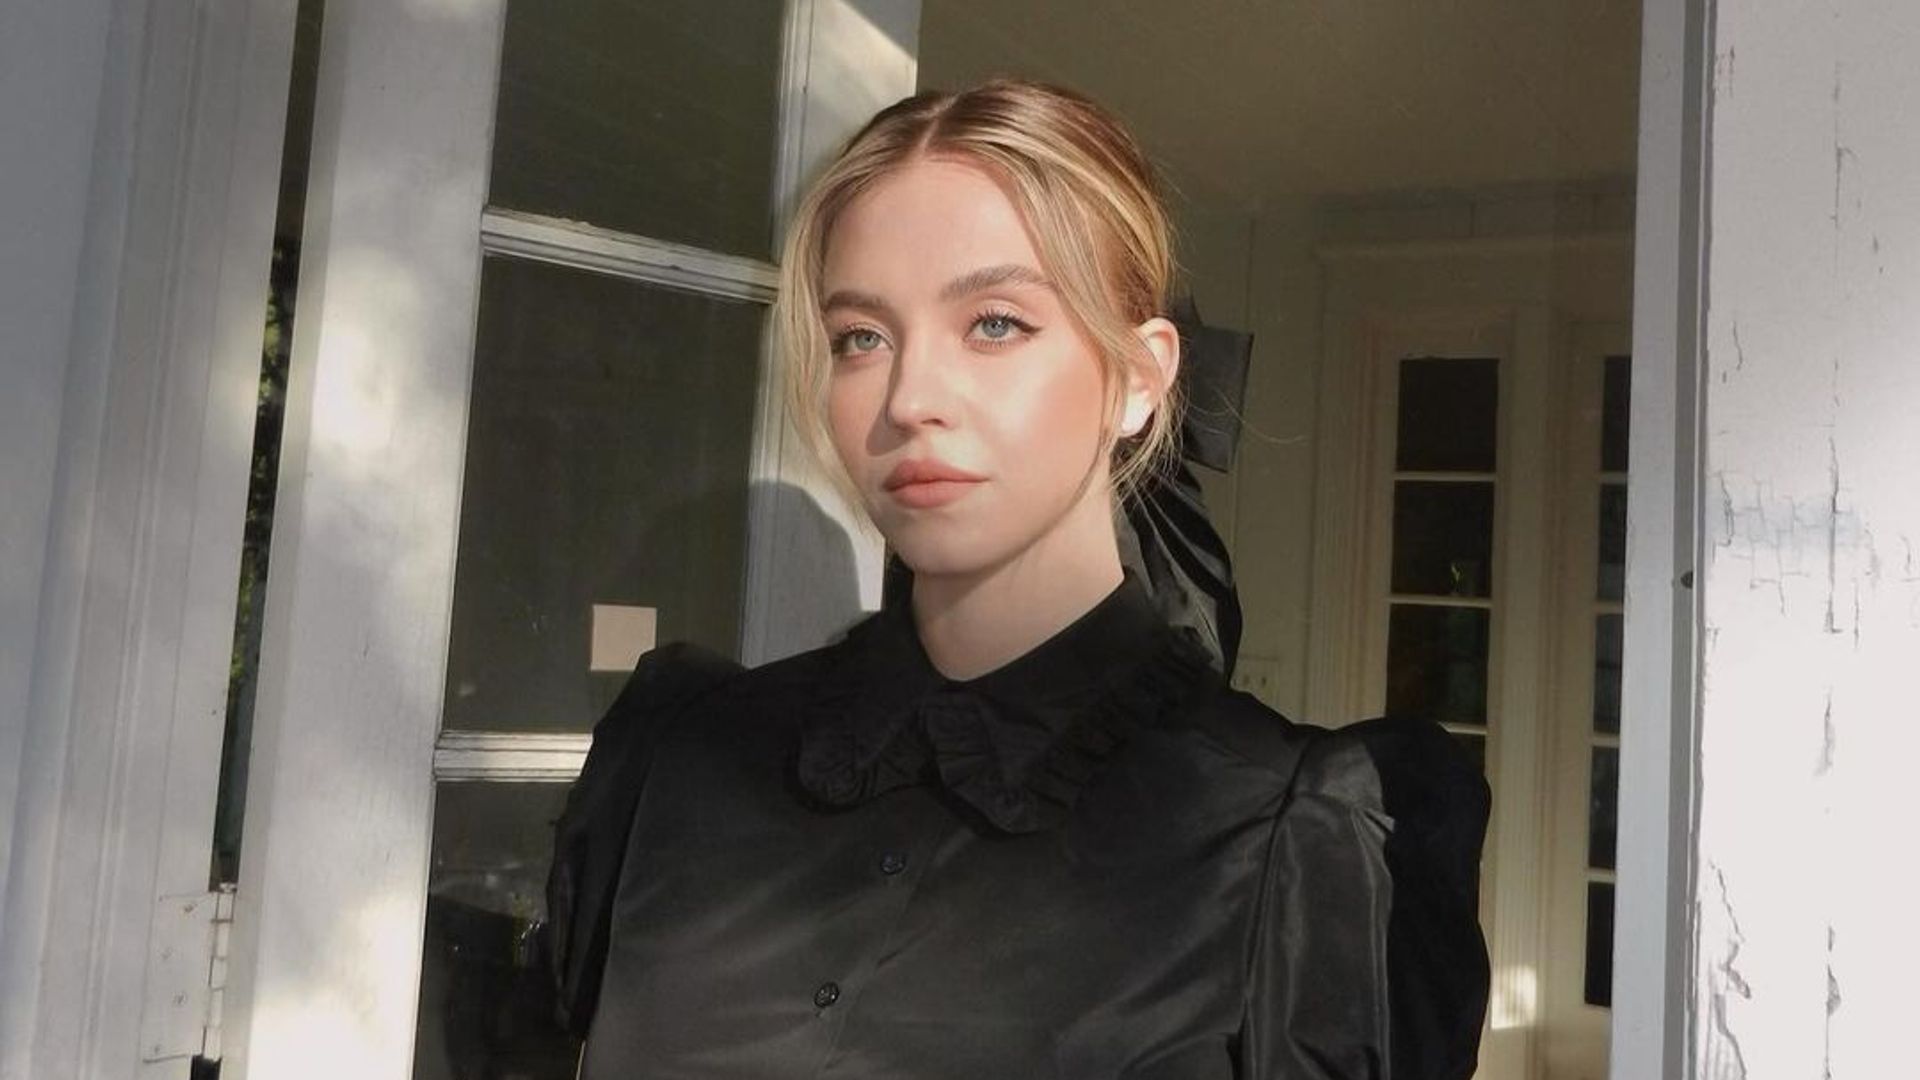 Sydney Sweeney's no trousers and knee-high tights look is truly iconic